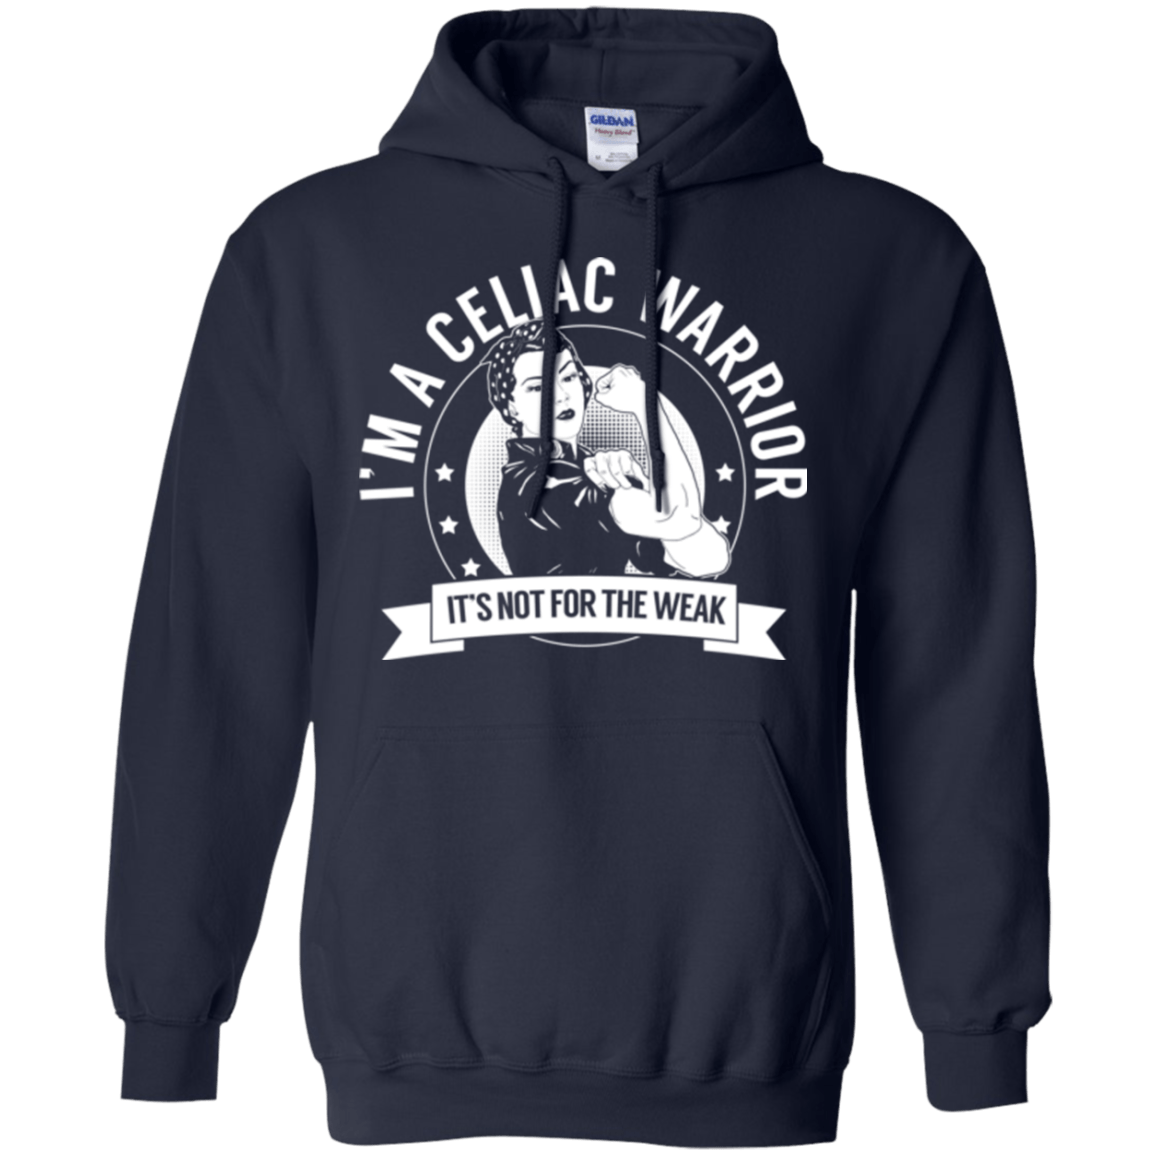 Celiac Warrior Not For The Weak Pullover Hoodie 8 oz. - The Unchargeables